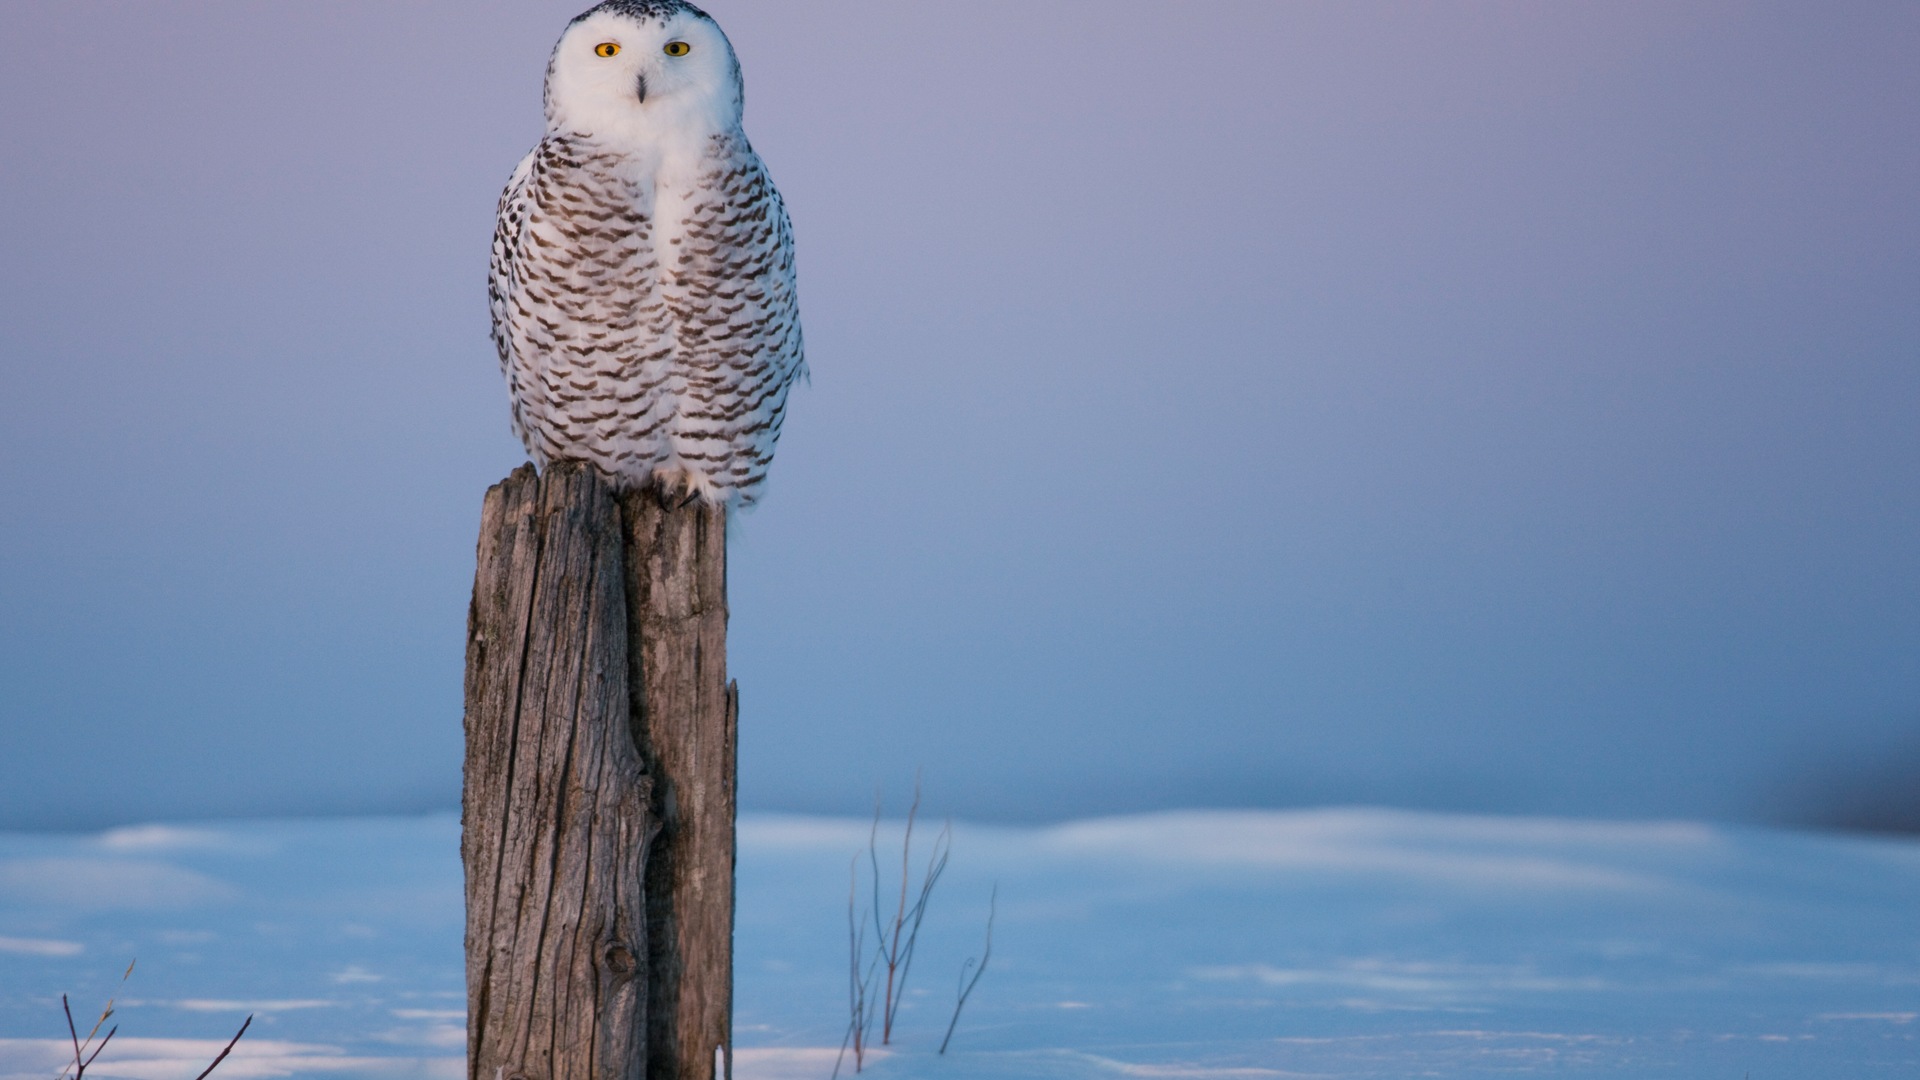 Windows 8 Wallpapers: Arctic, the nature ecological landscape, arctic animals #2 - 1920x1080